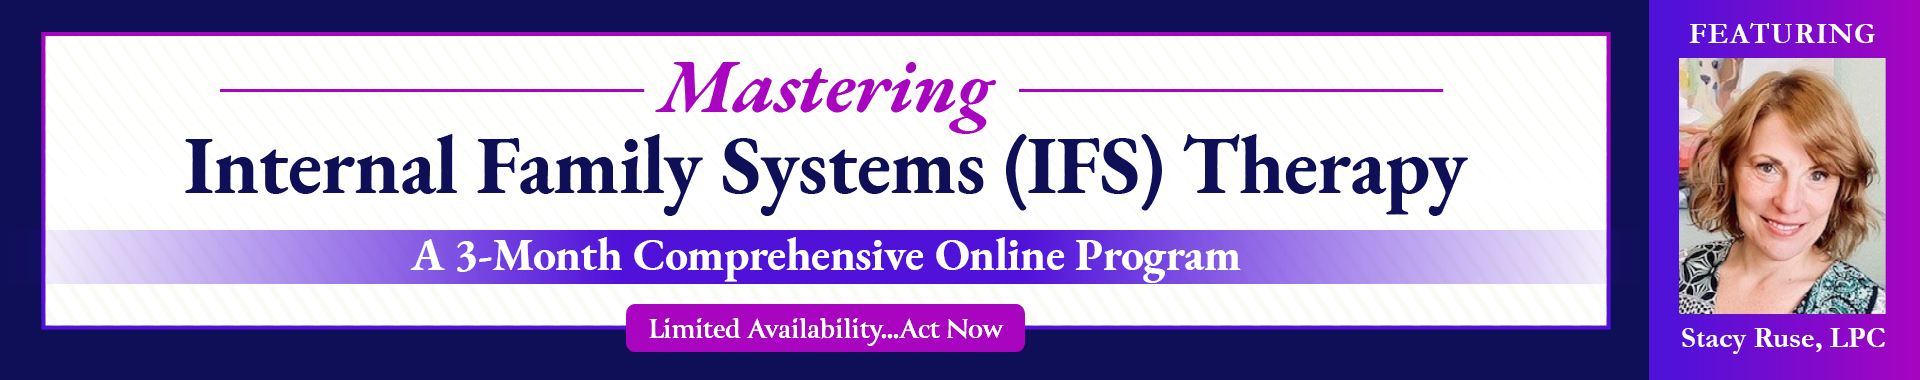 Mastering Internal Family Systems (IFS) Therapy: A 3-Month Comprehensive Online Program